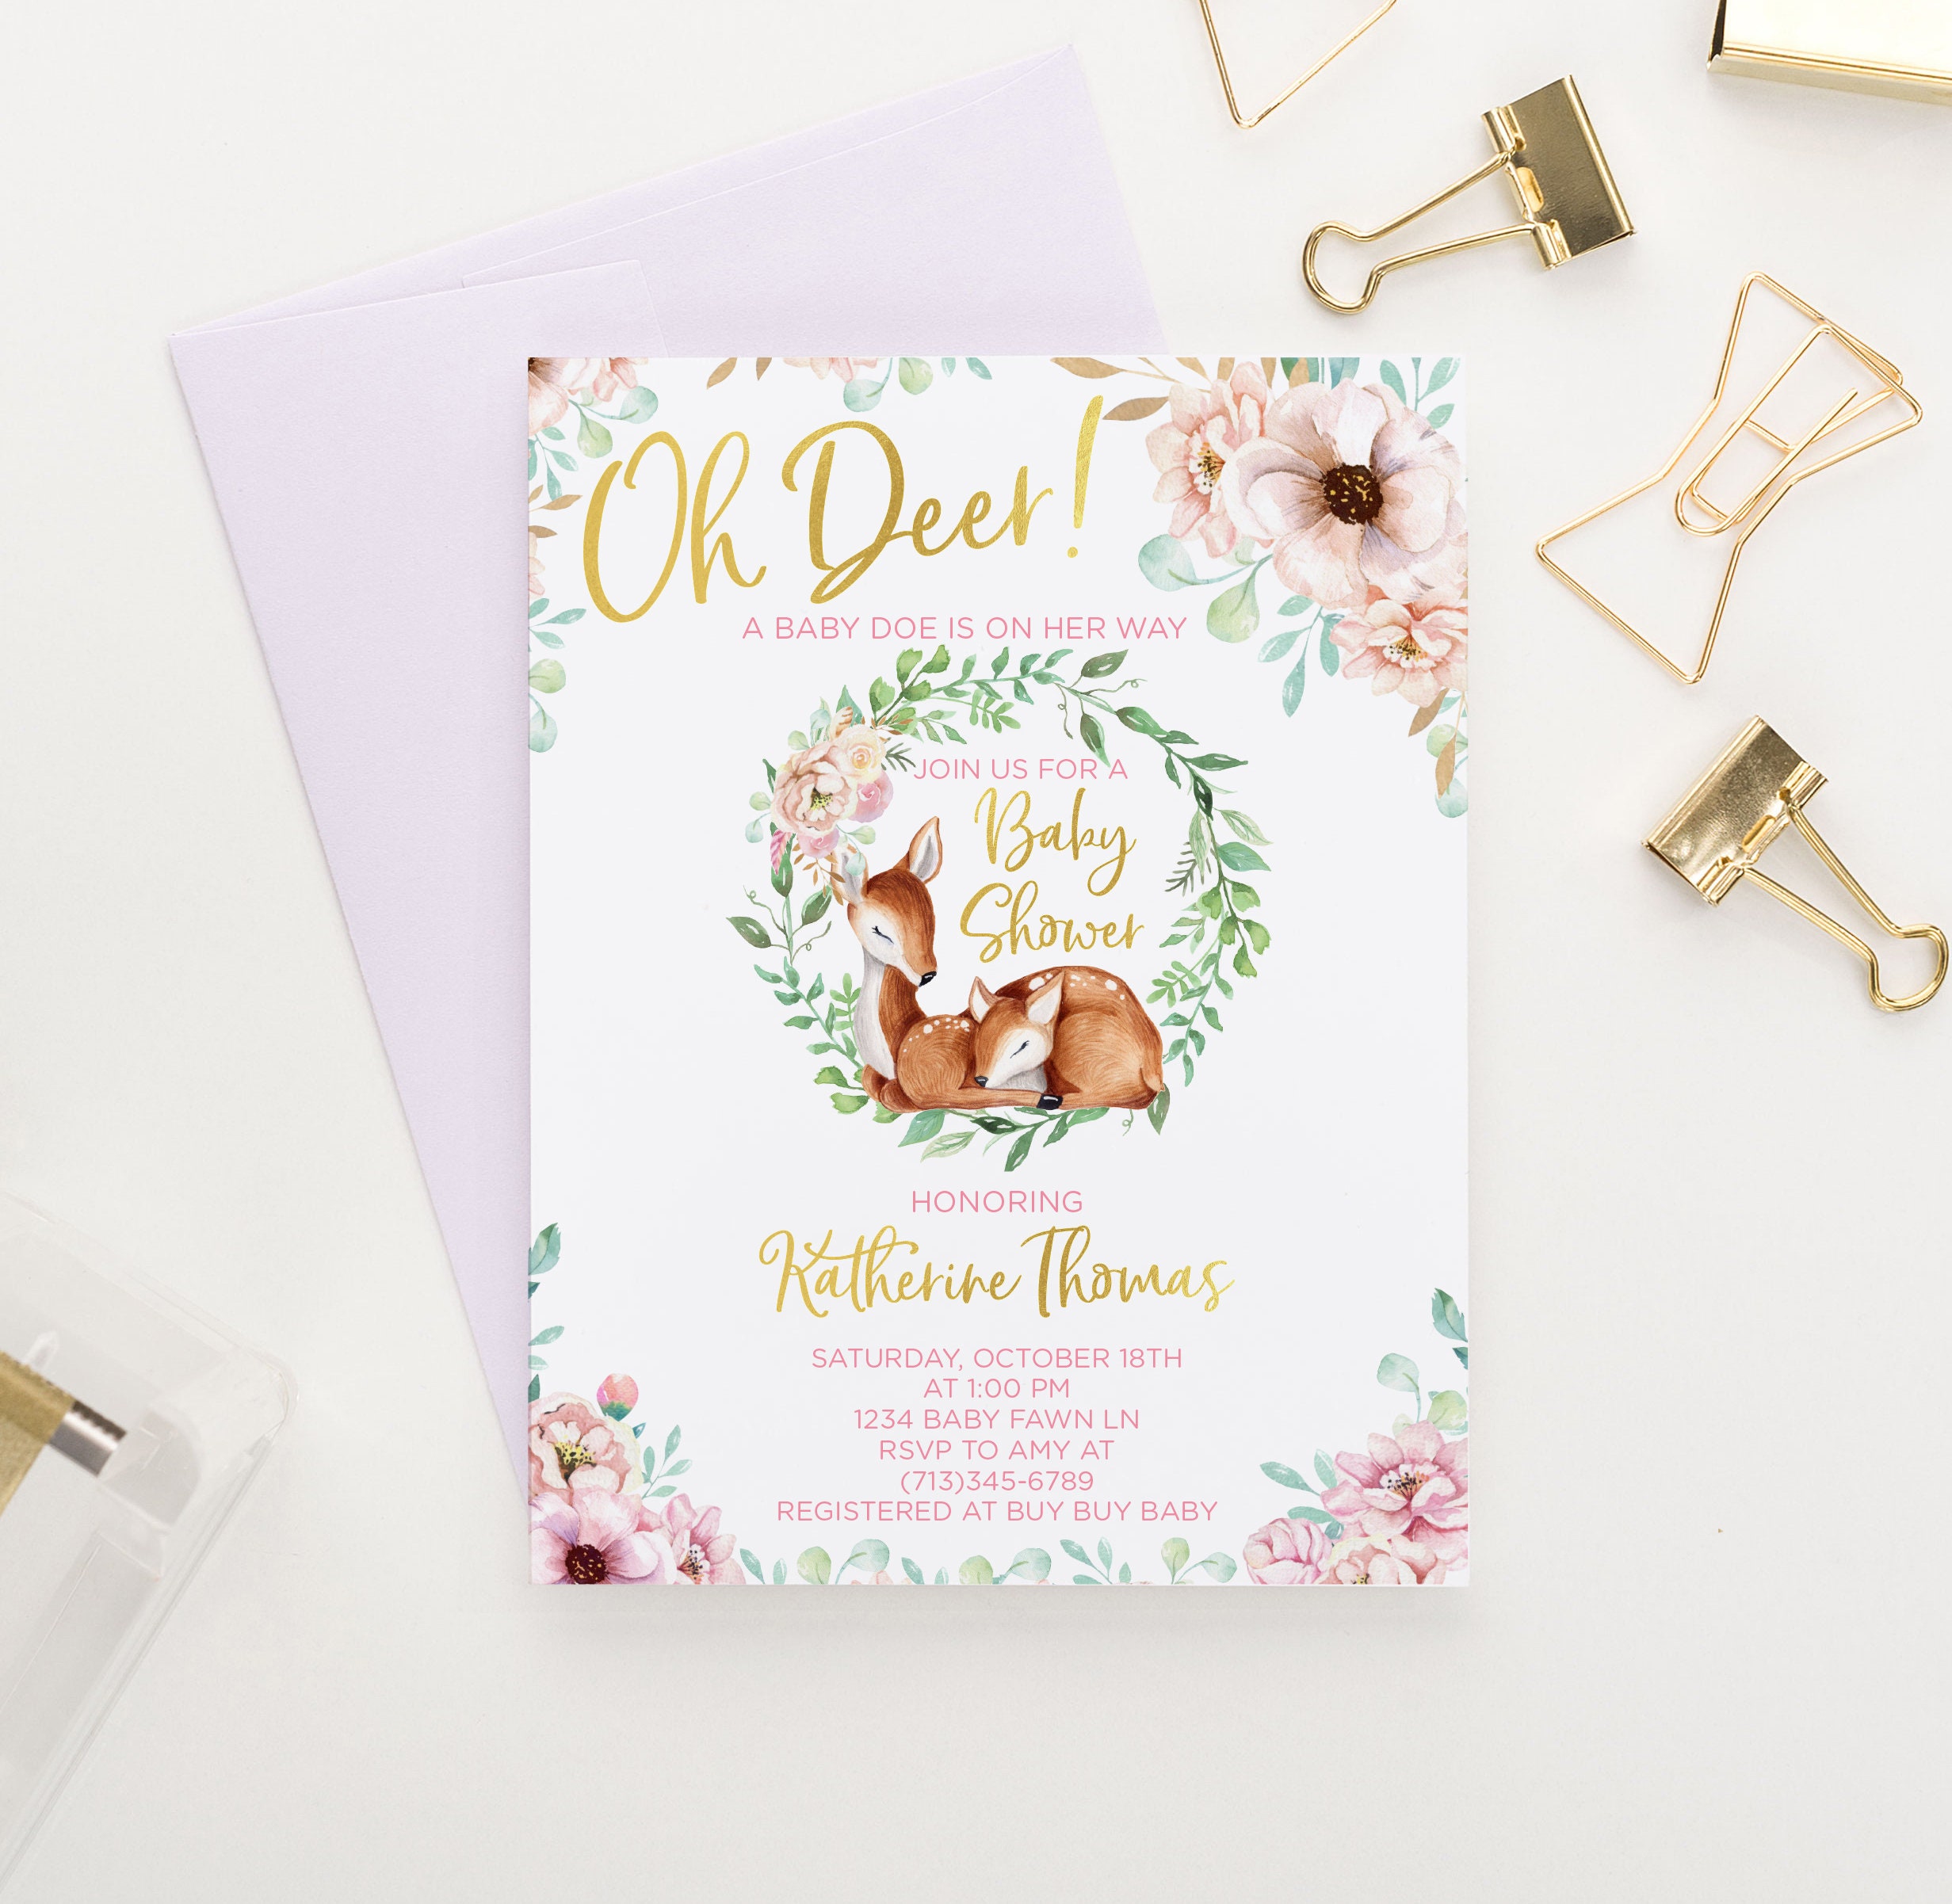 Girls Personalized Cute Stationery Cards, Elegant Script Thank You